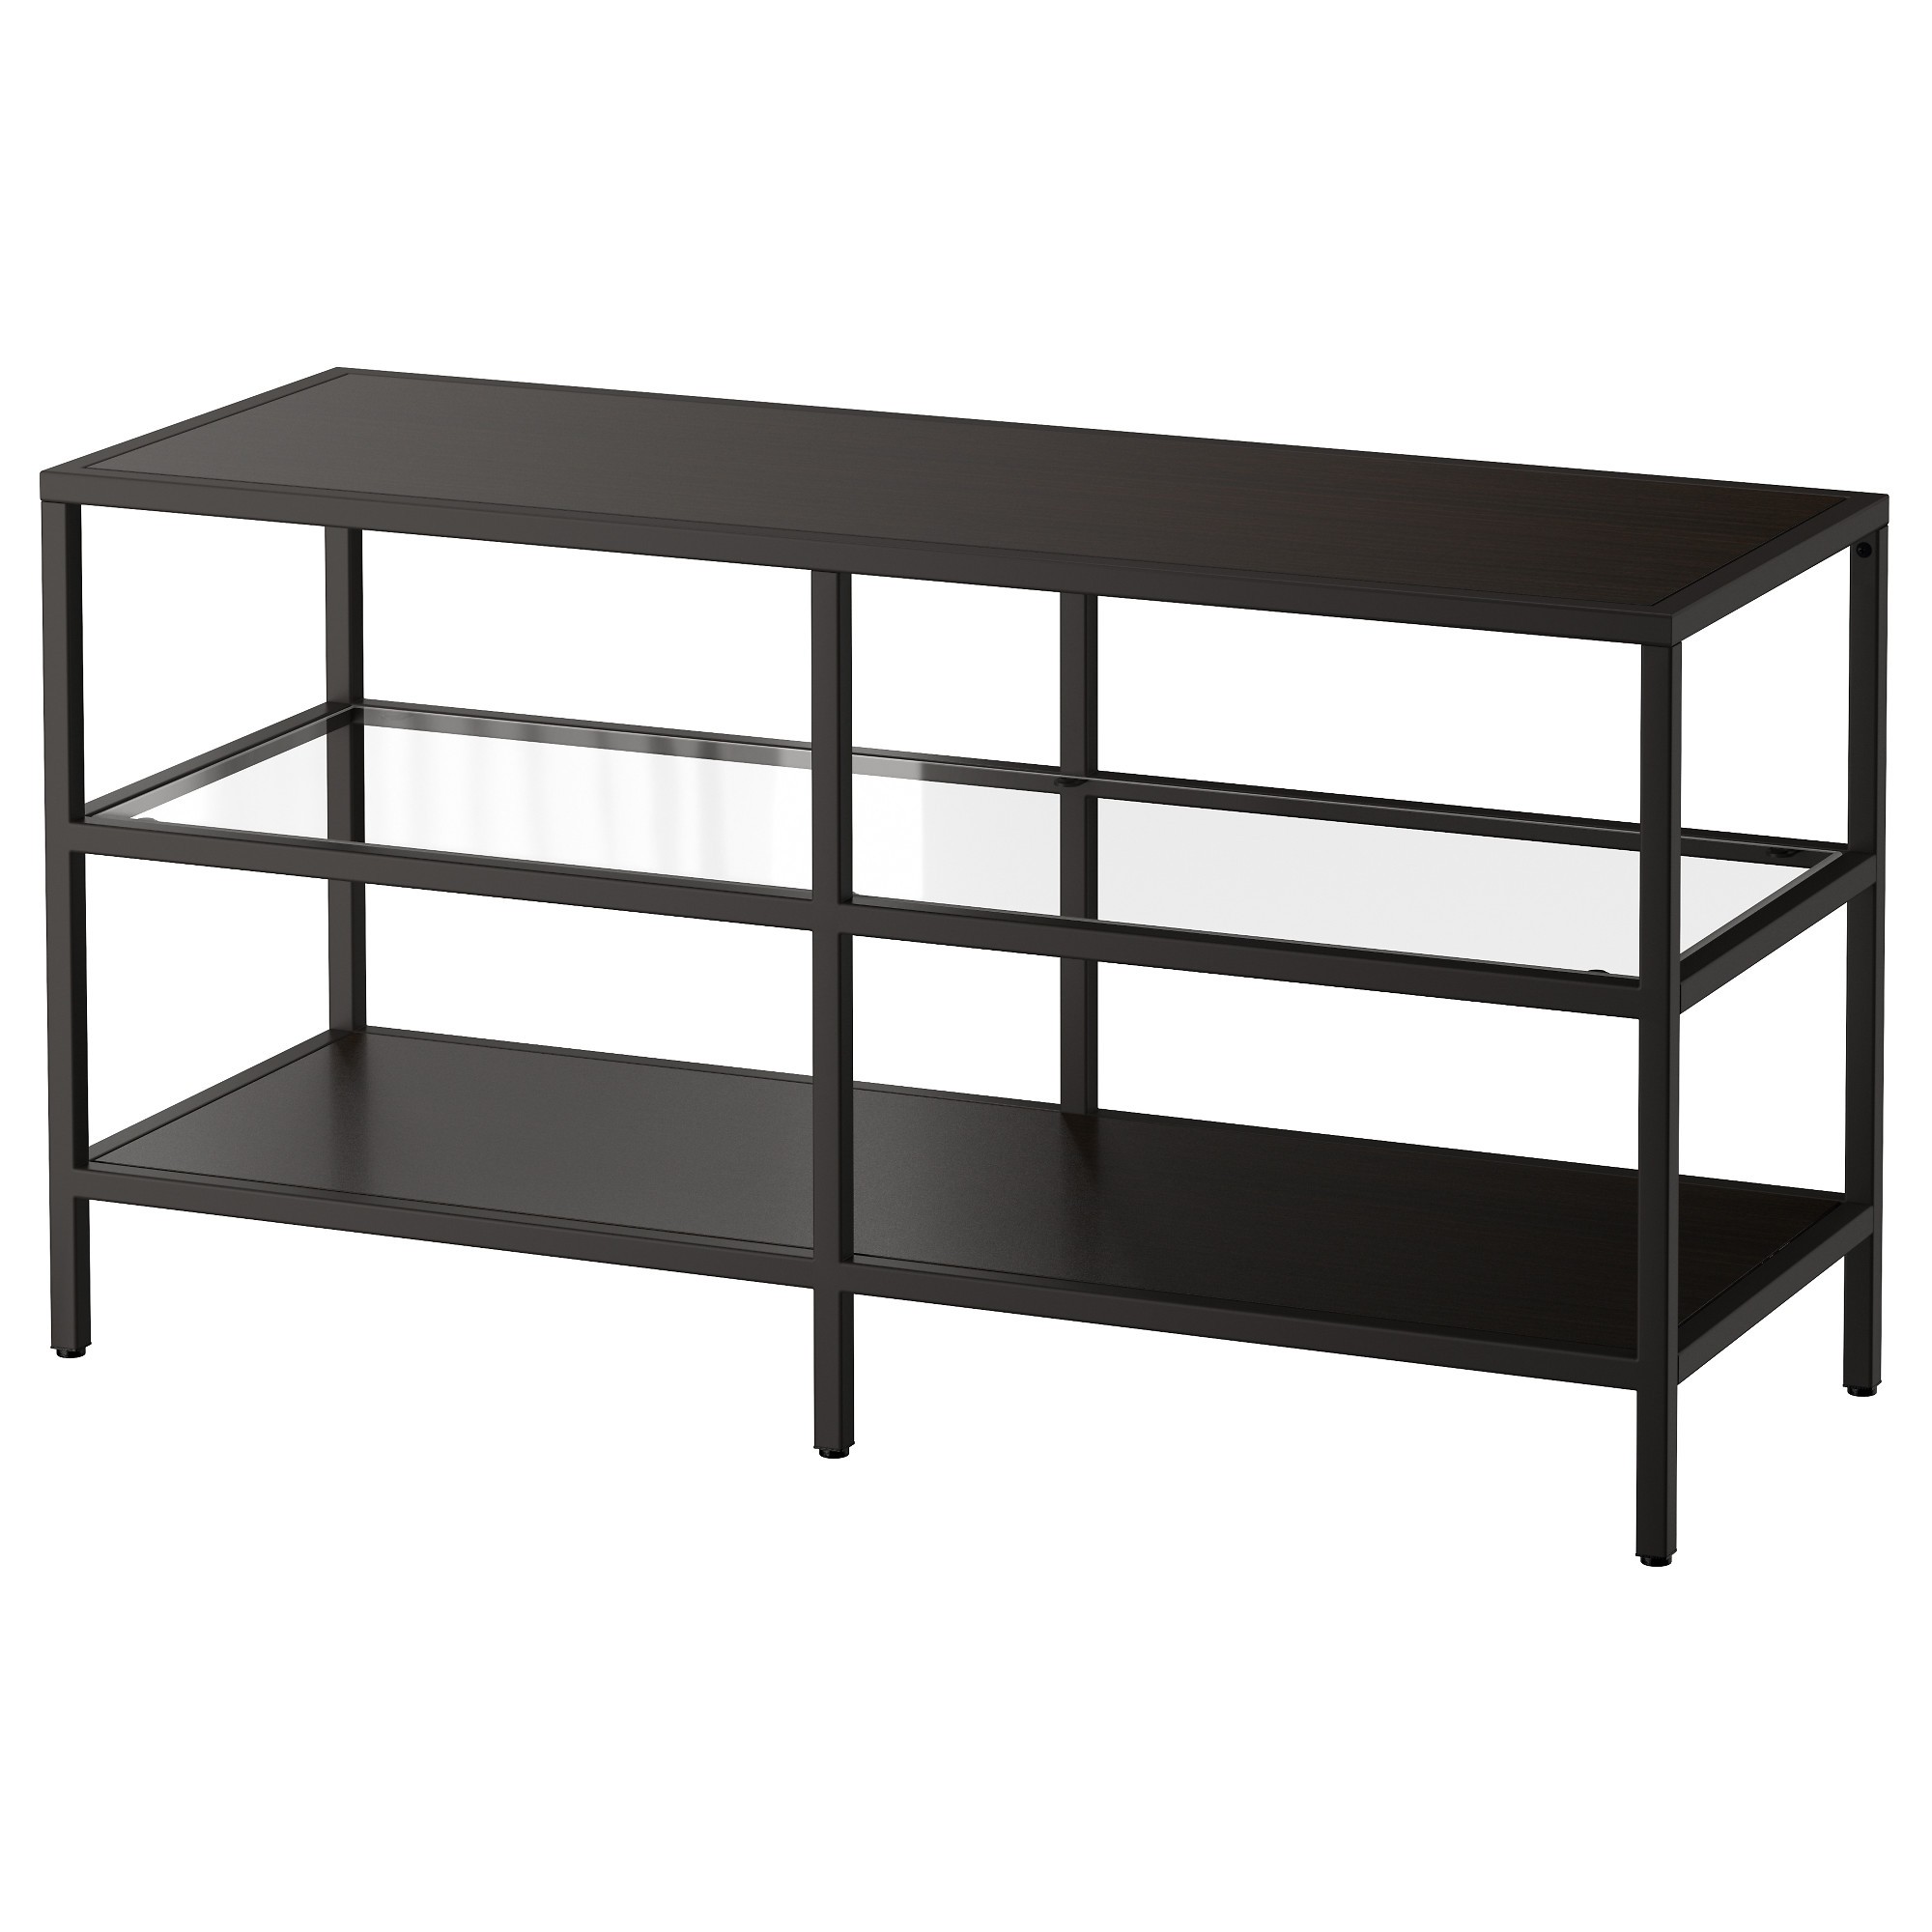 Glass and metal tv stands 6